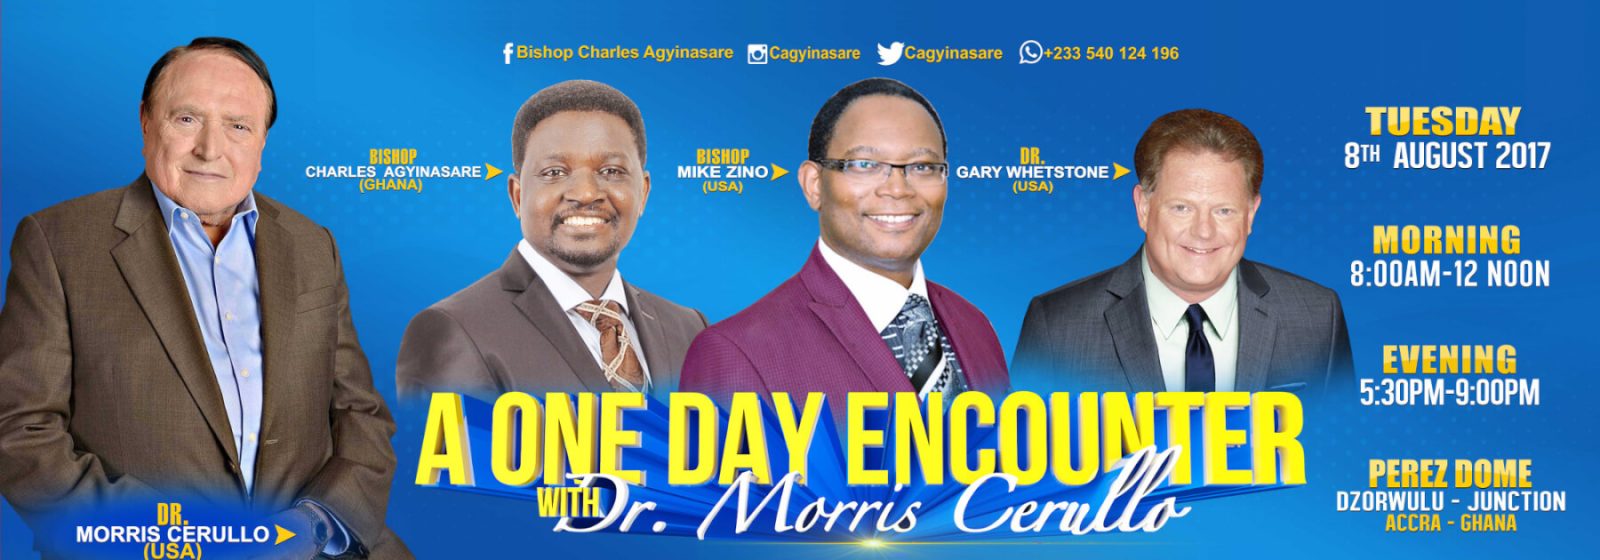 Dr. Morris Cerullo visits the Perez Dome, Accra, Ghana on the 8th August 2017